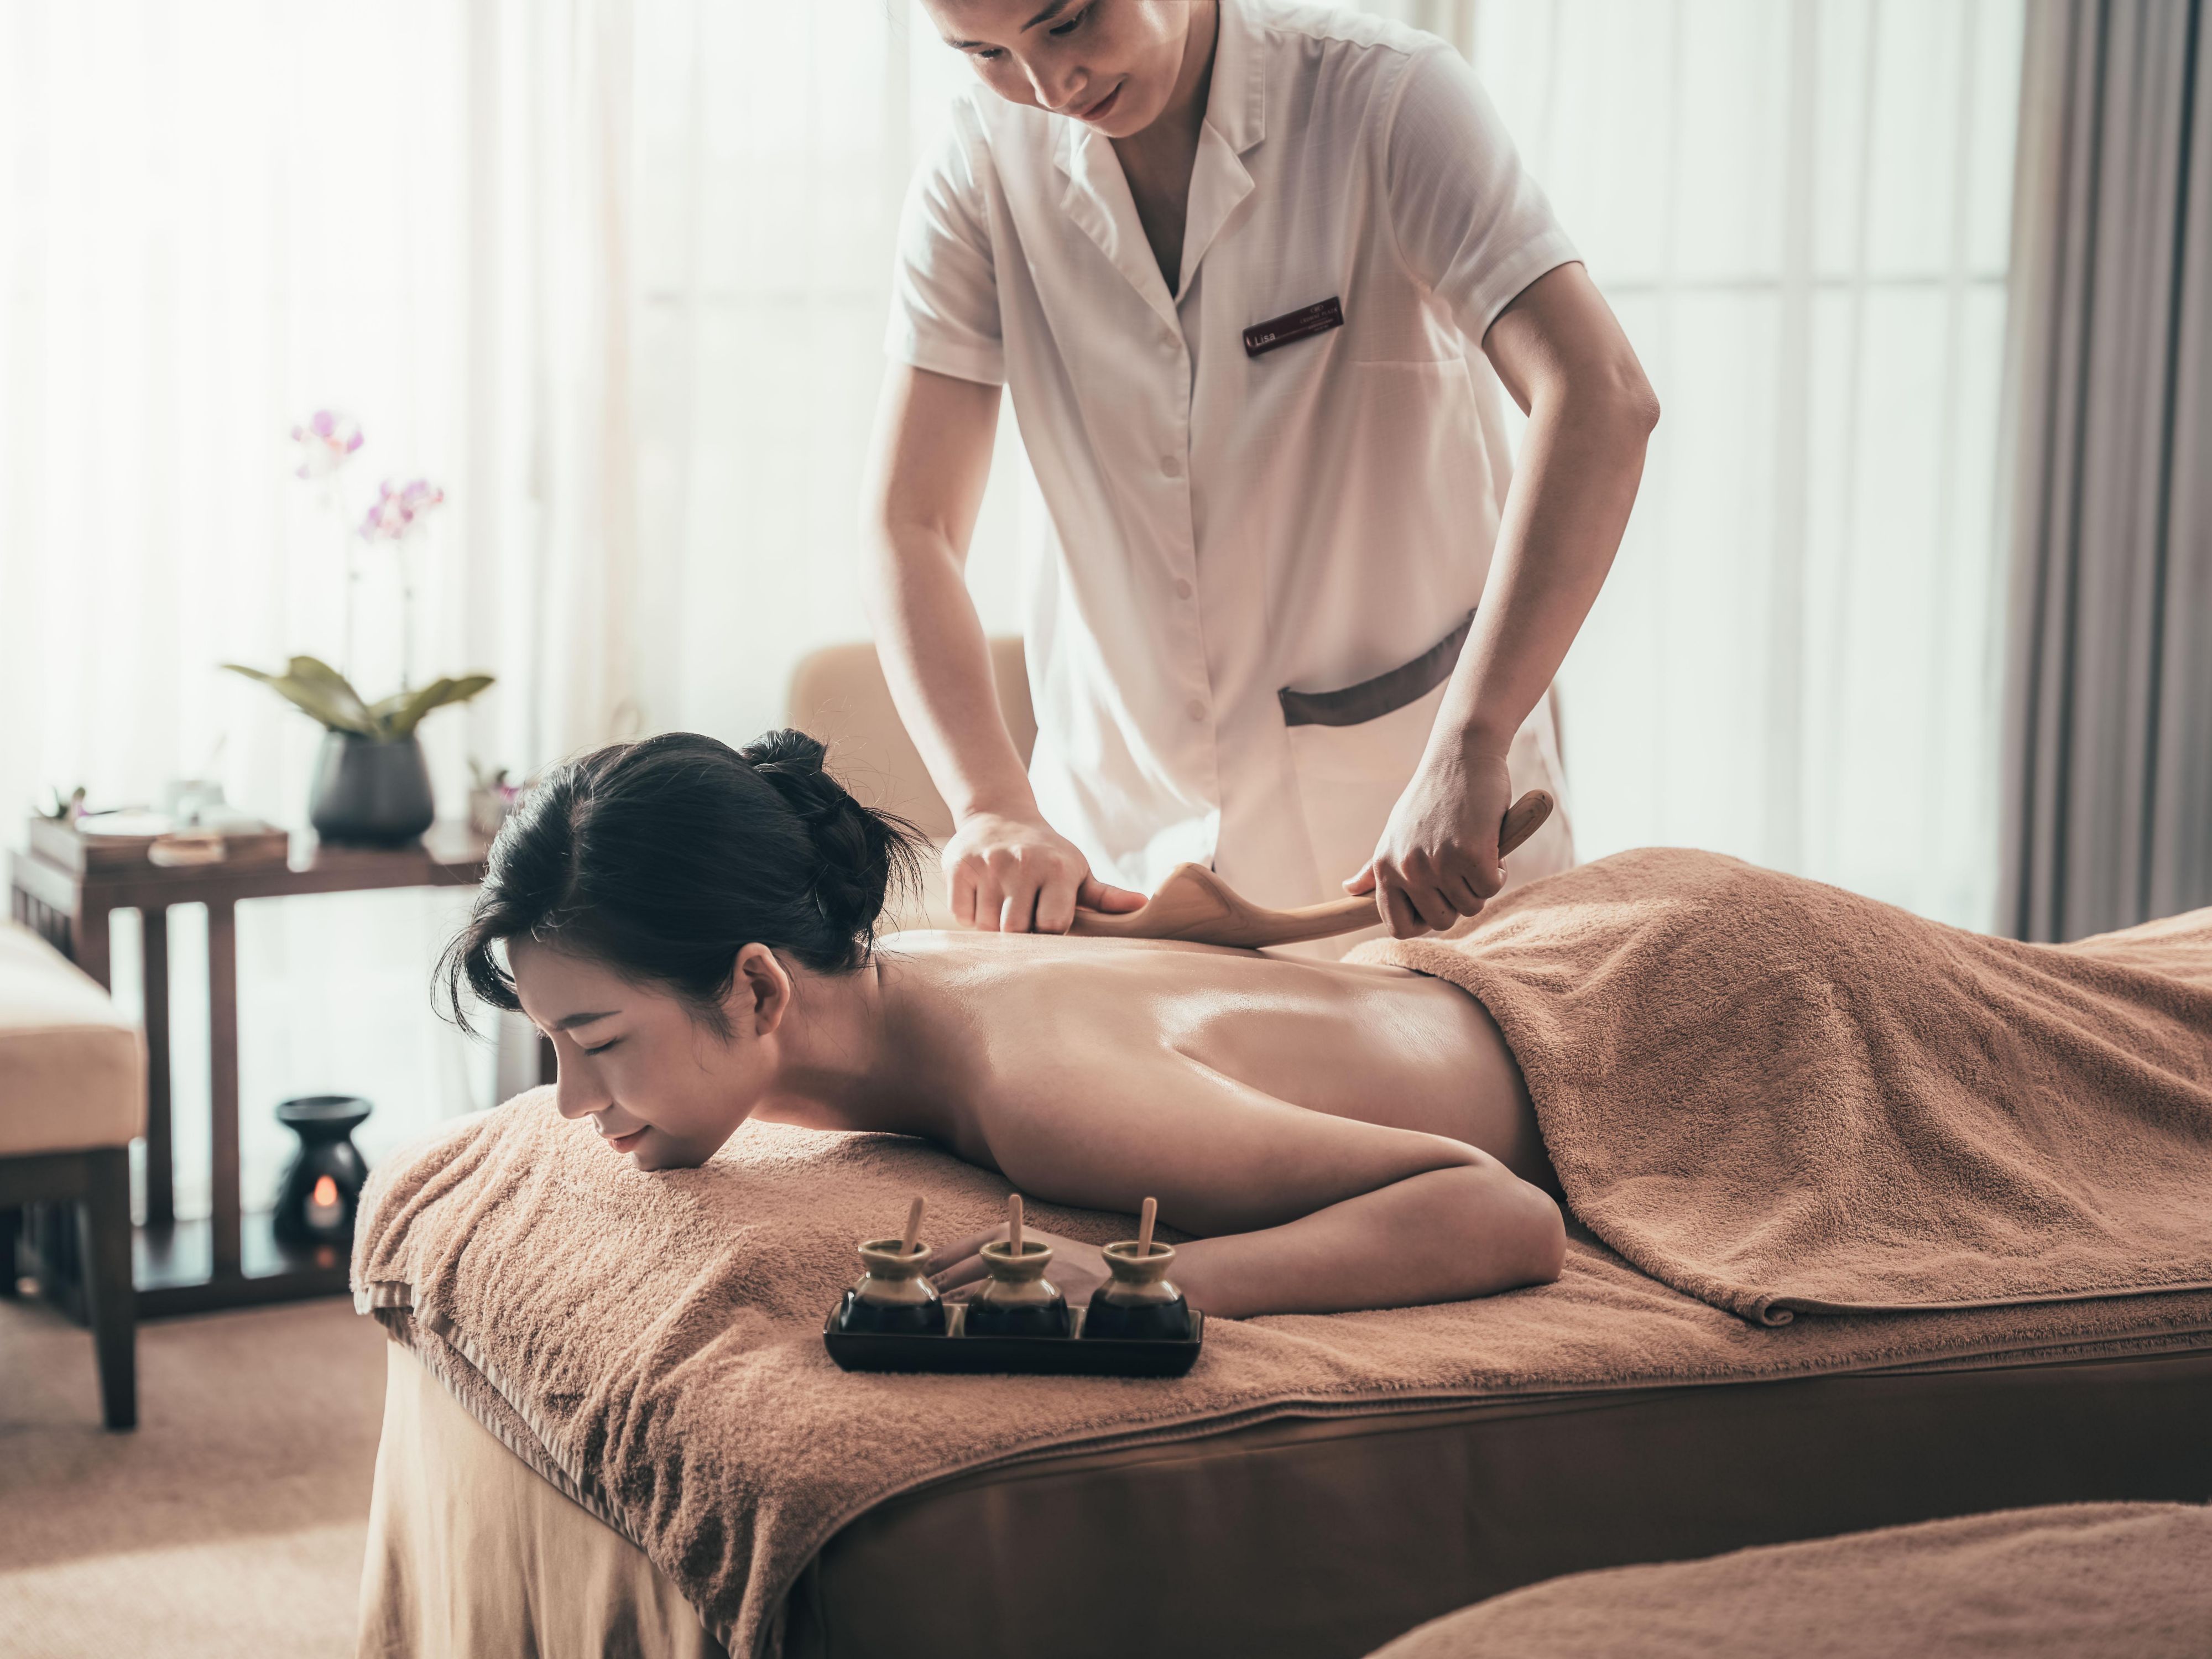 SPA is located on the 5th floor with 7 gracefully designed treatment rooms. 3 couple treatment rooms and 4 single treatment rooms are displayed in the space which allows our guests to experience luxury, relaxation and exclusiveness.